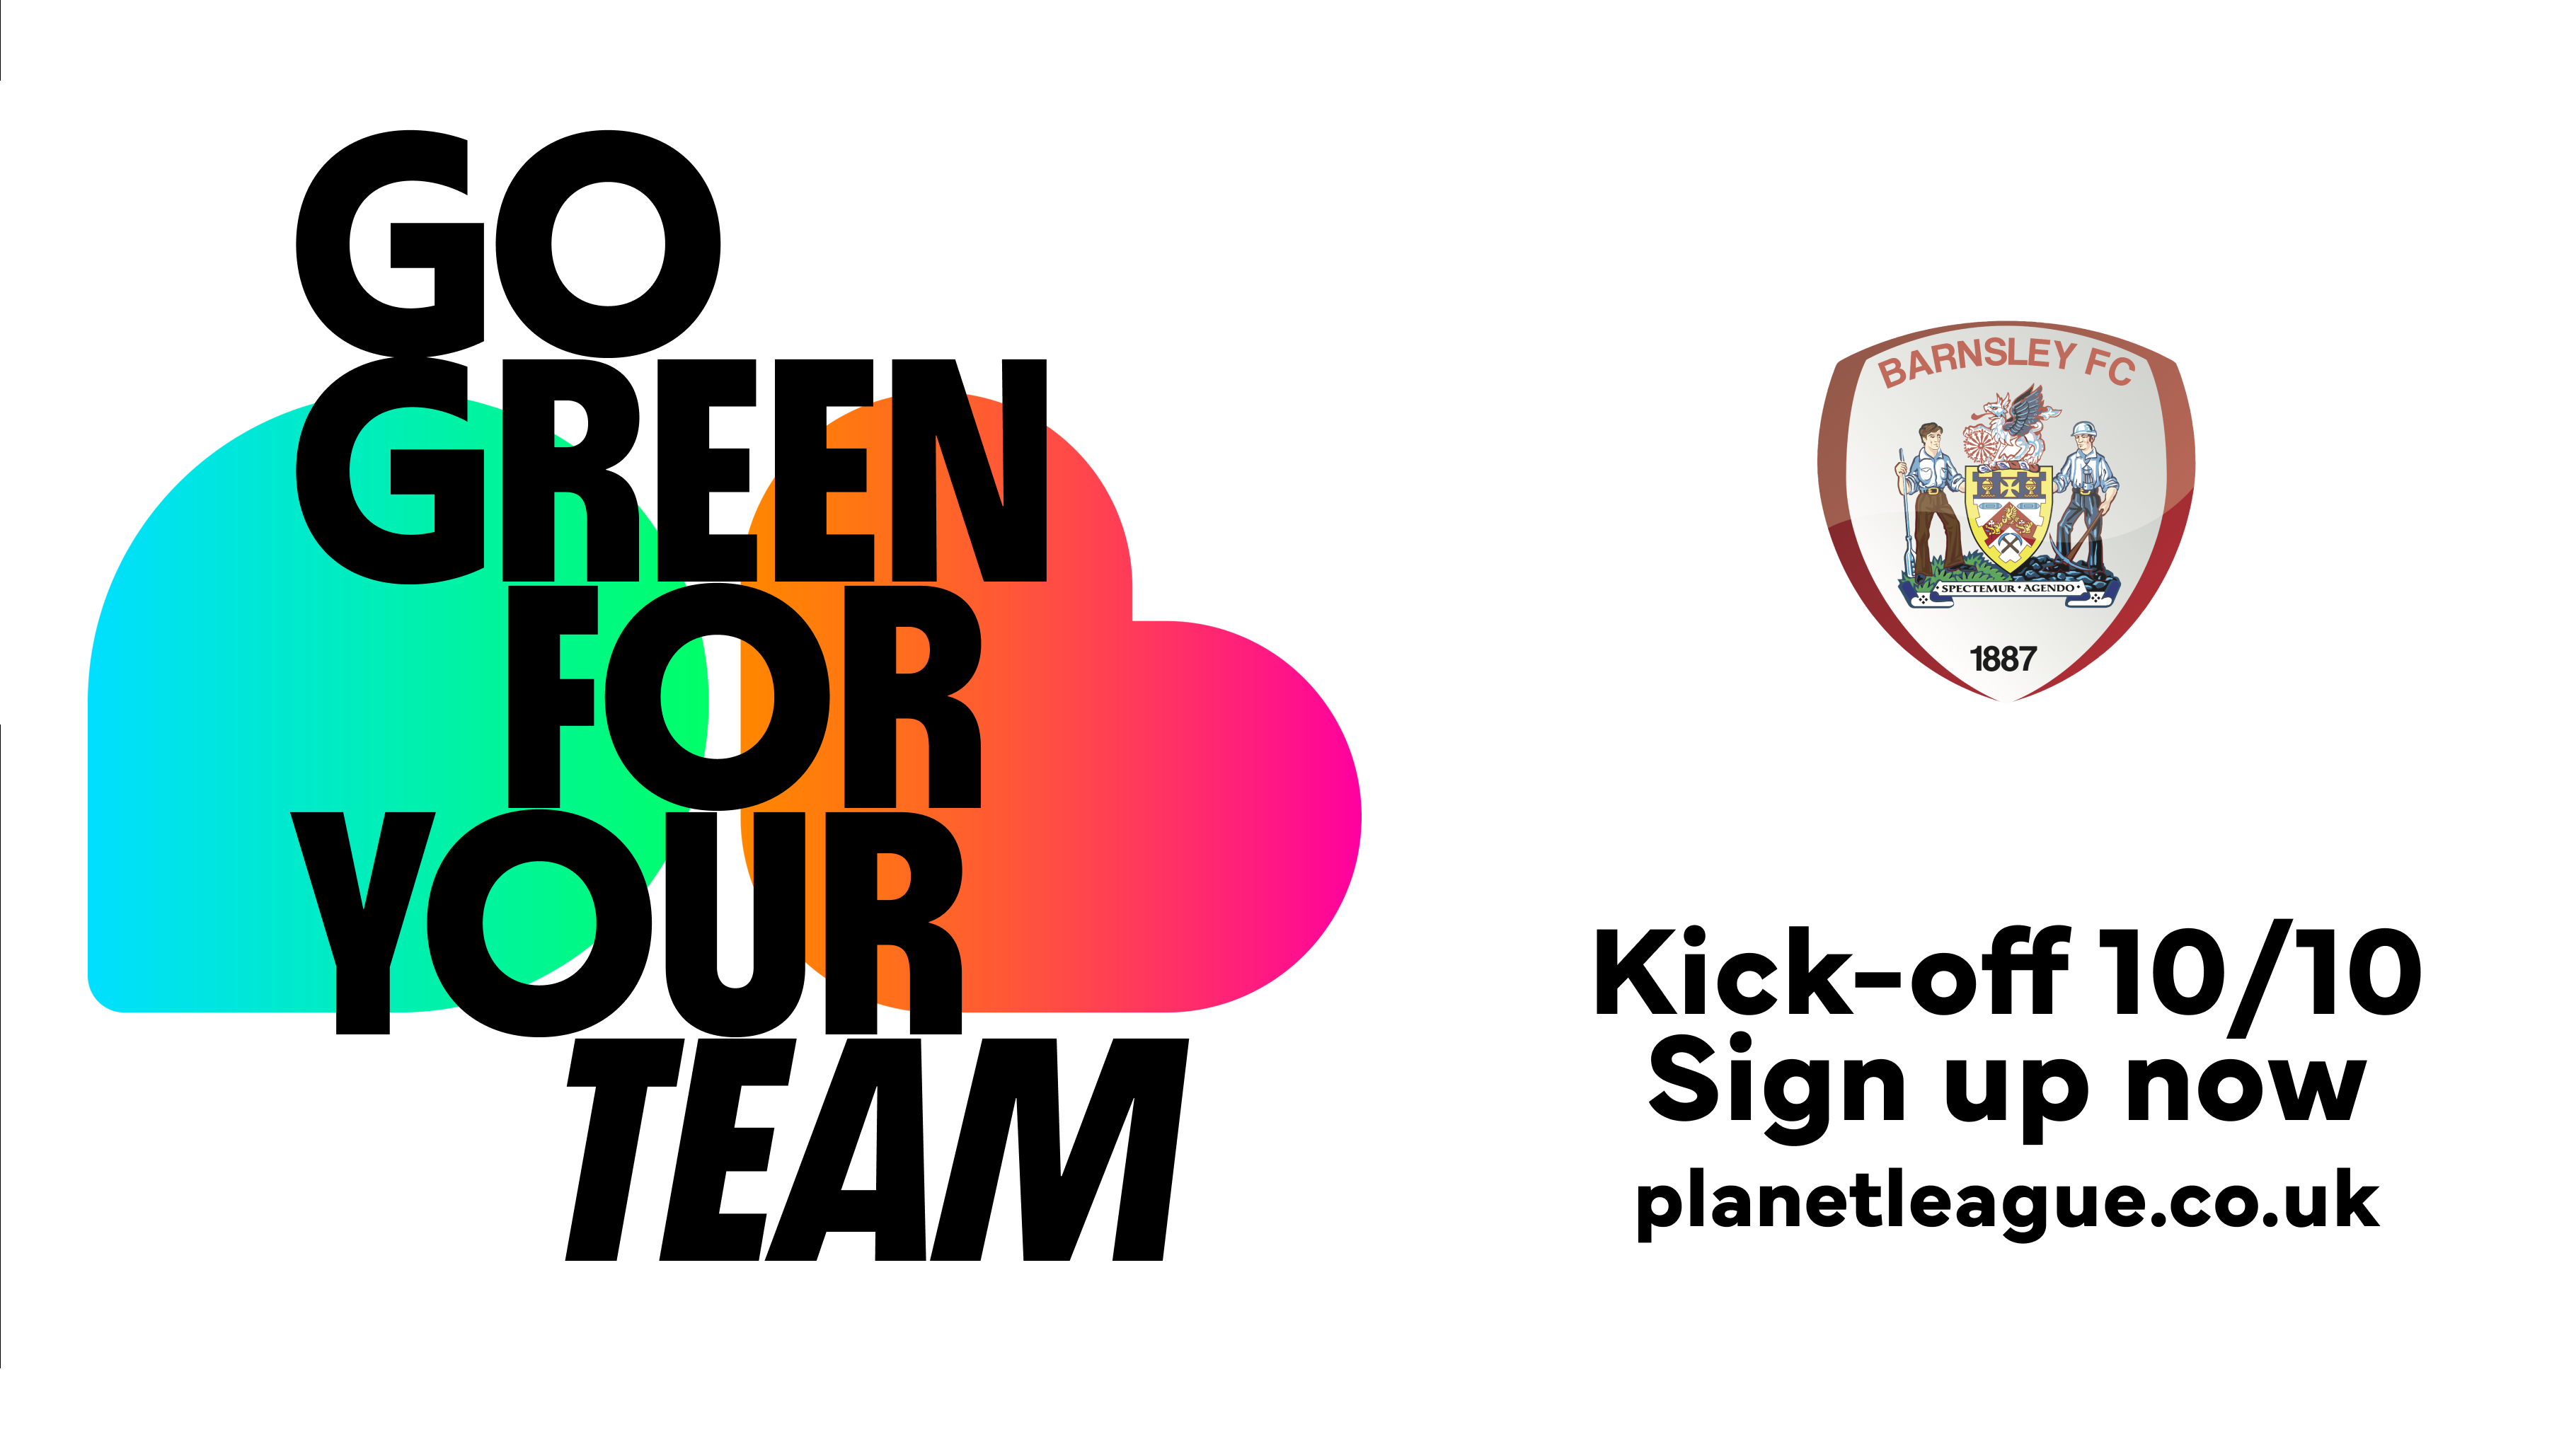 Reds in the Community and Barnsley FC Join Britain’s Biggest Climate Action Football Campaign